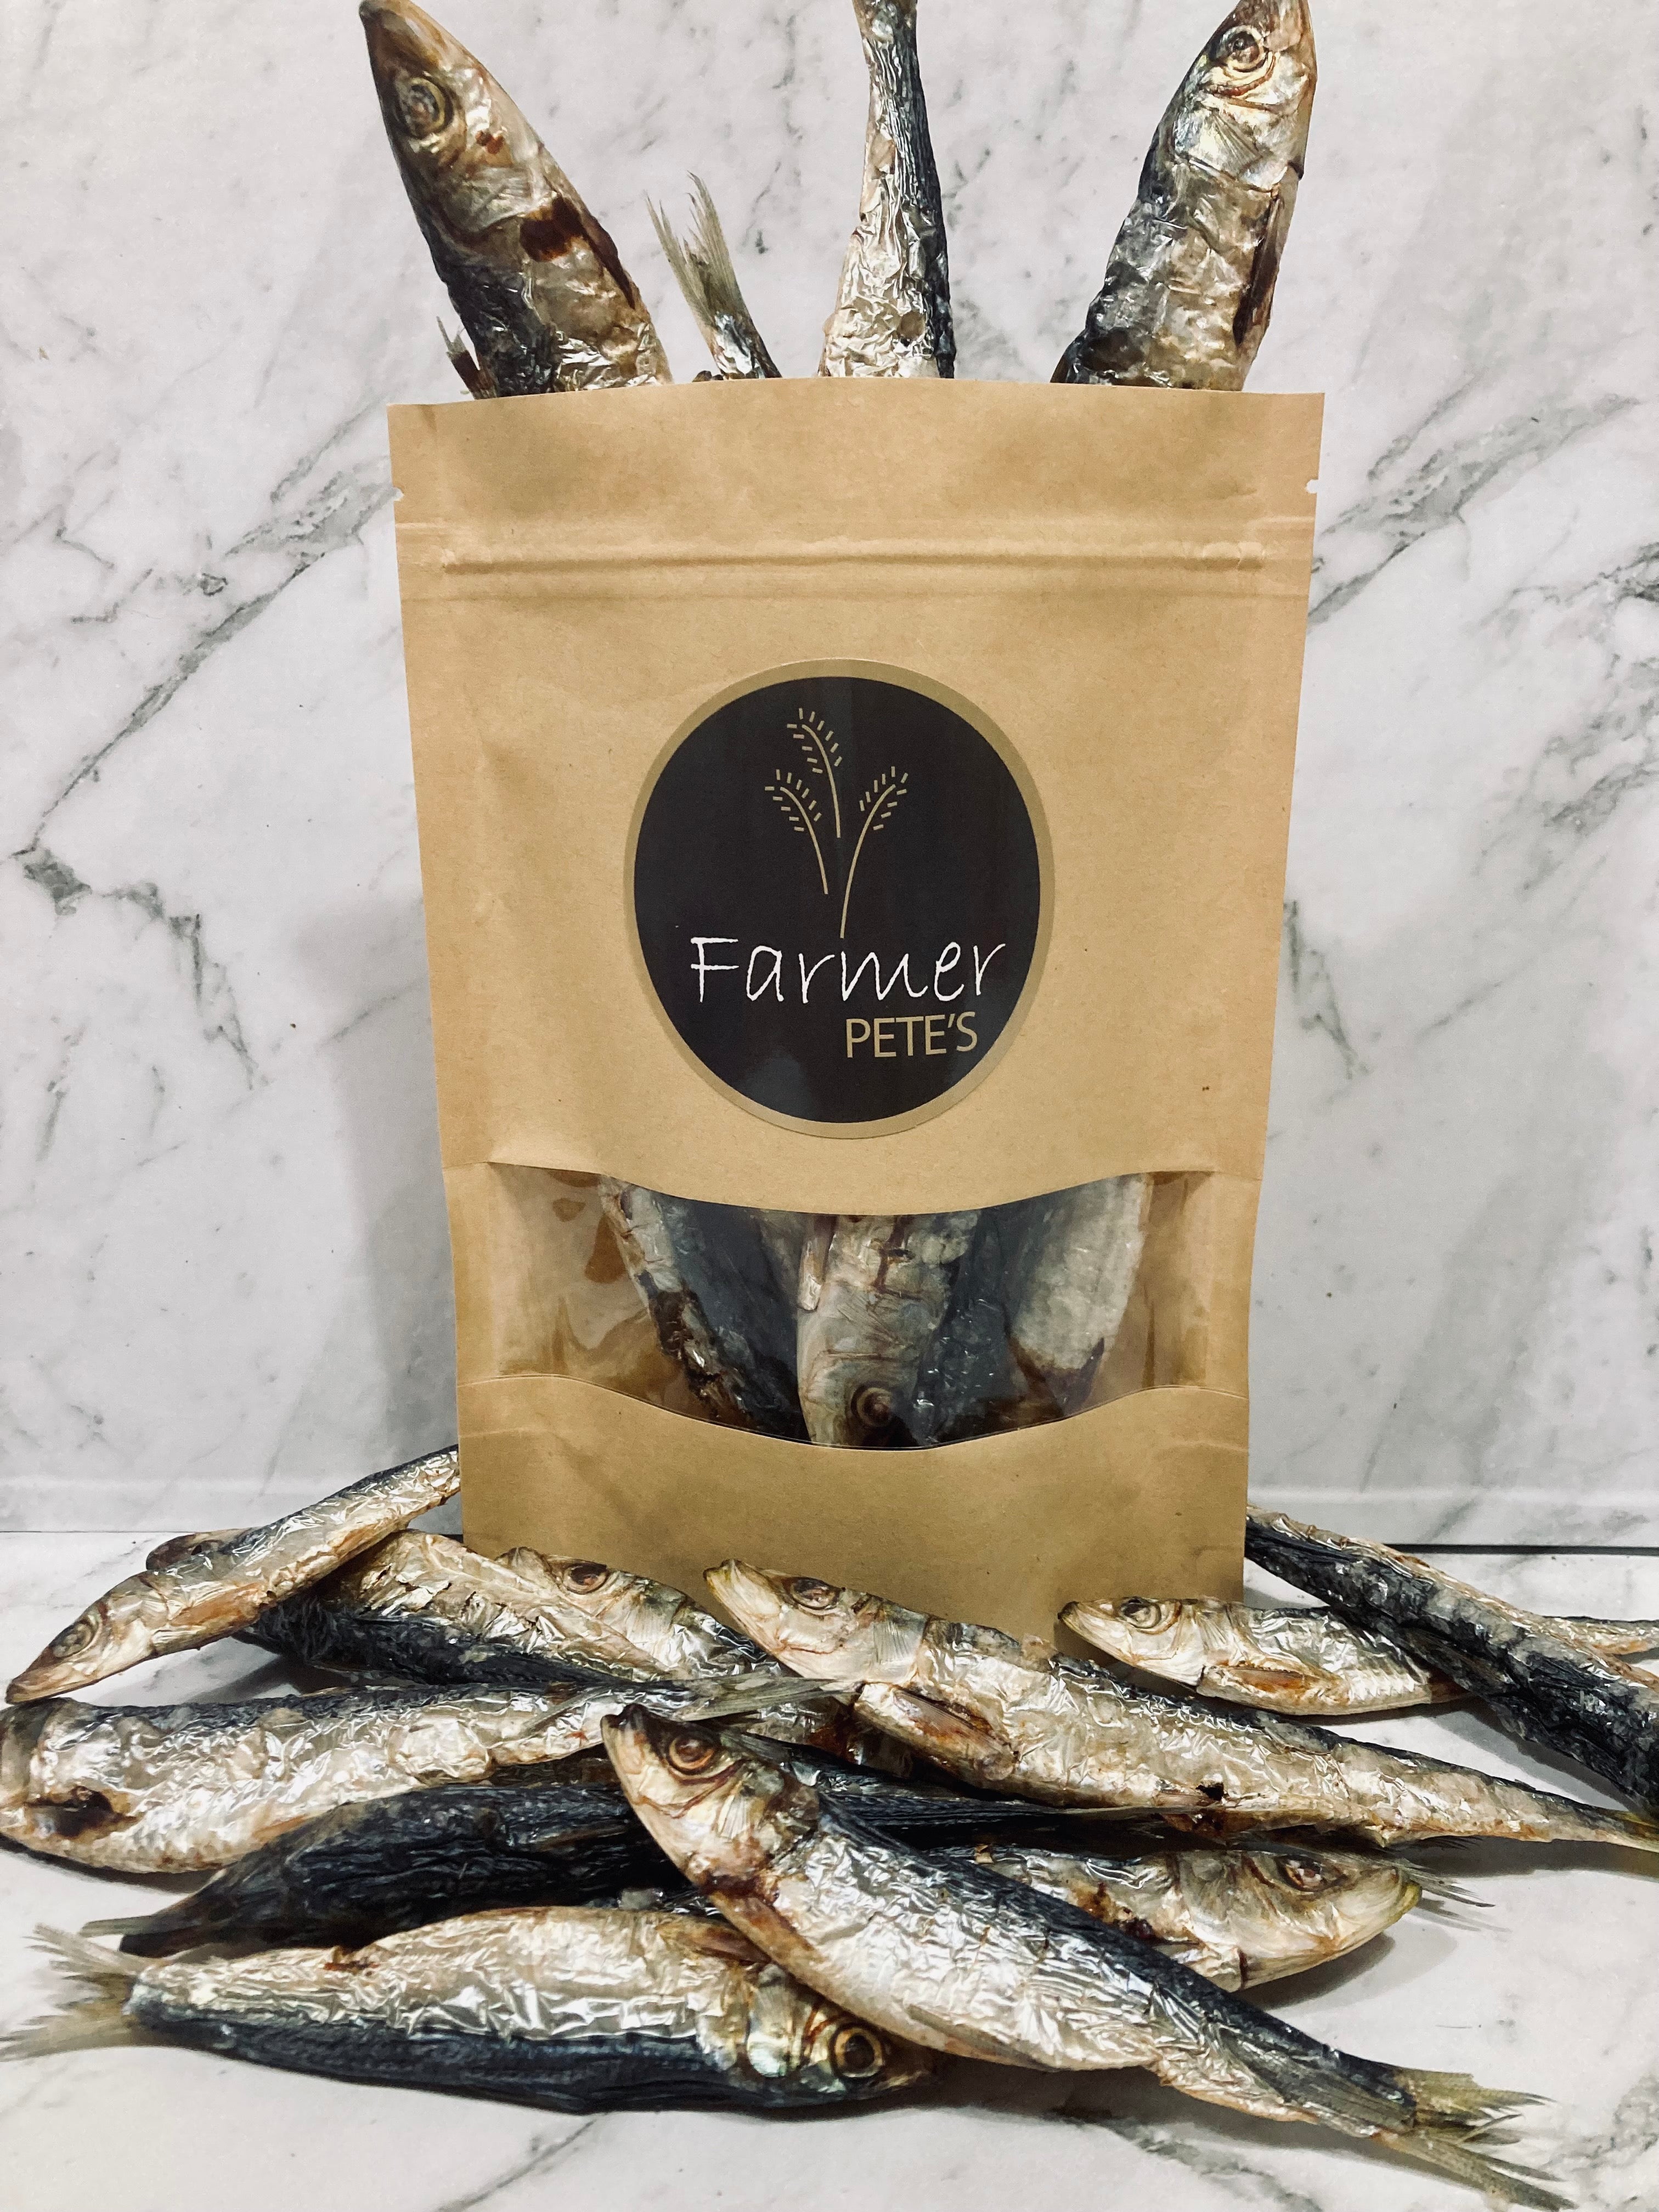 Naturally dehydrated pilchards (fish) dog treats by Farmer Pete's